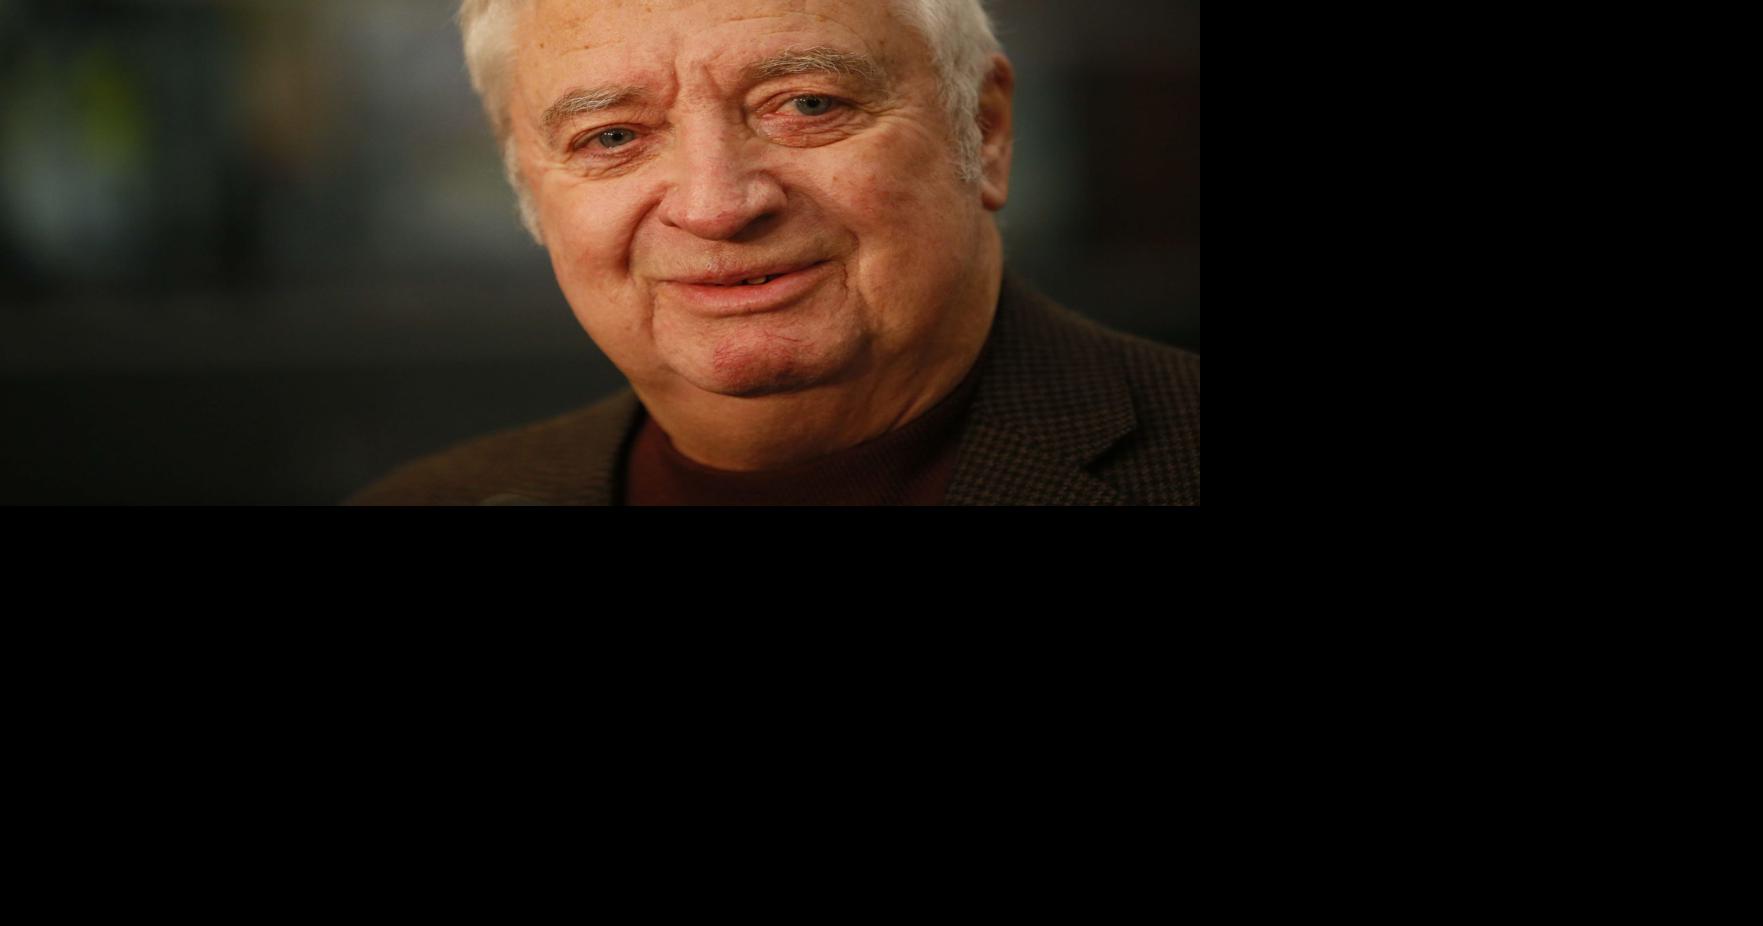 Rick Jeanneret obituary: Hall of Fame NHL broadcaster dies at 81 –